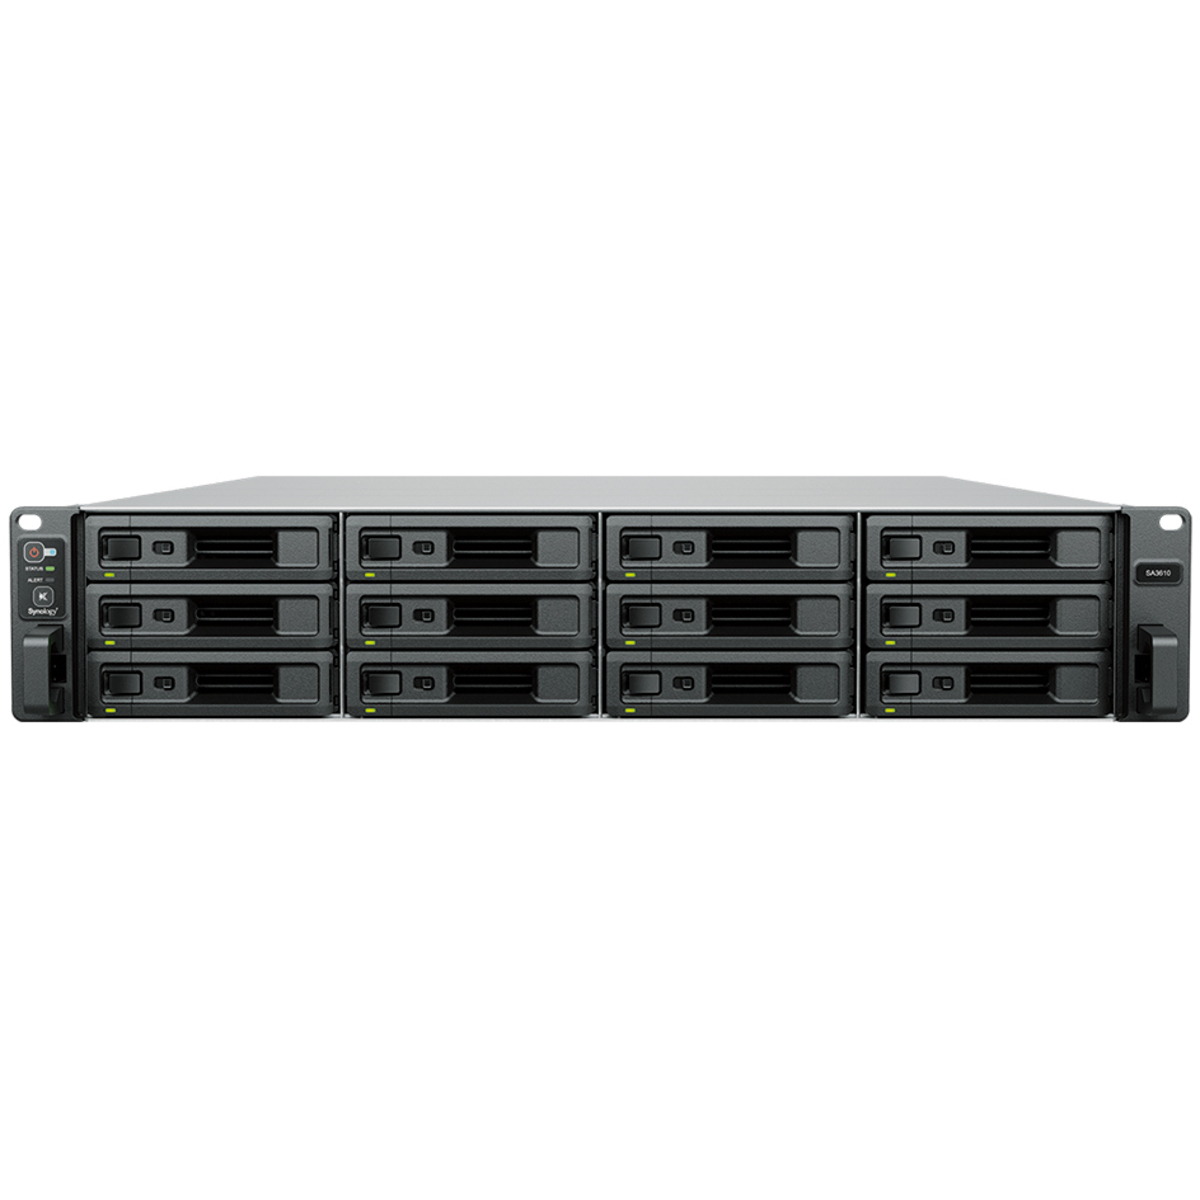 Synology RackStation SA3410 48tb 12-Bay RackMount Large Business / Enterprise NAS - Network Attached Storage Device 12x4tb Samsung 870 EVO MZ-77E4T0BAM 2.5 560/530MB/s SATA 6Gb/s SSD CONSUMER Class Drives Installed - Burn-In Tested - ON SALE RackStation SA3410